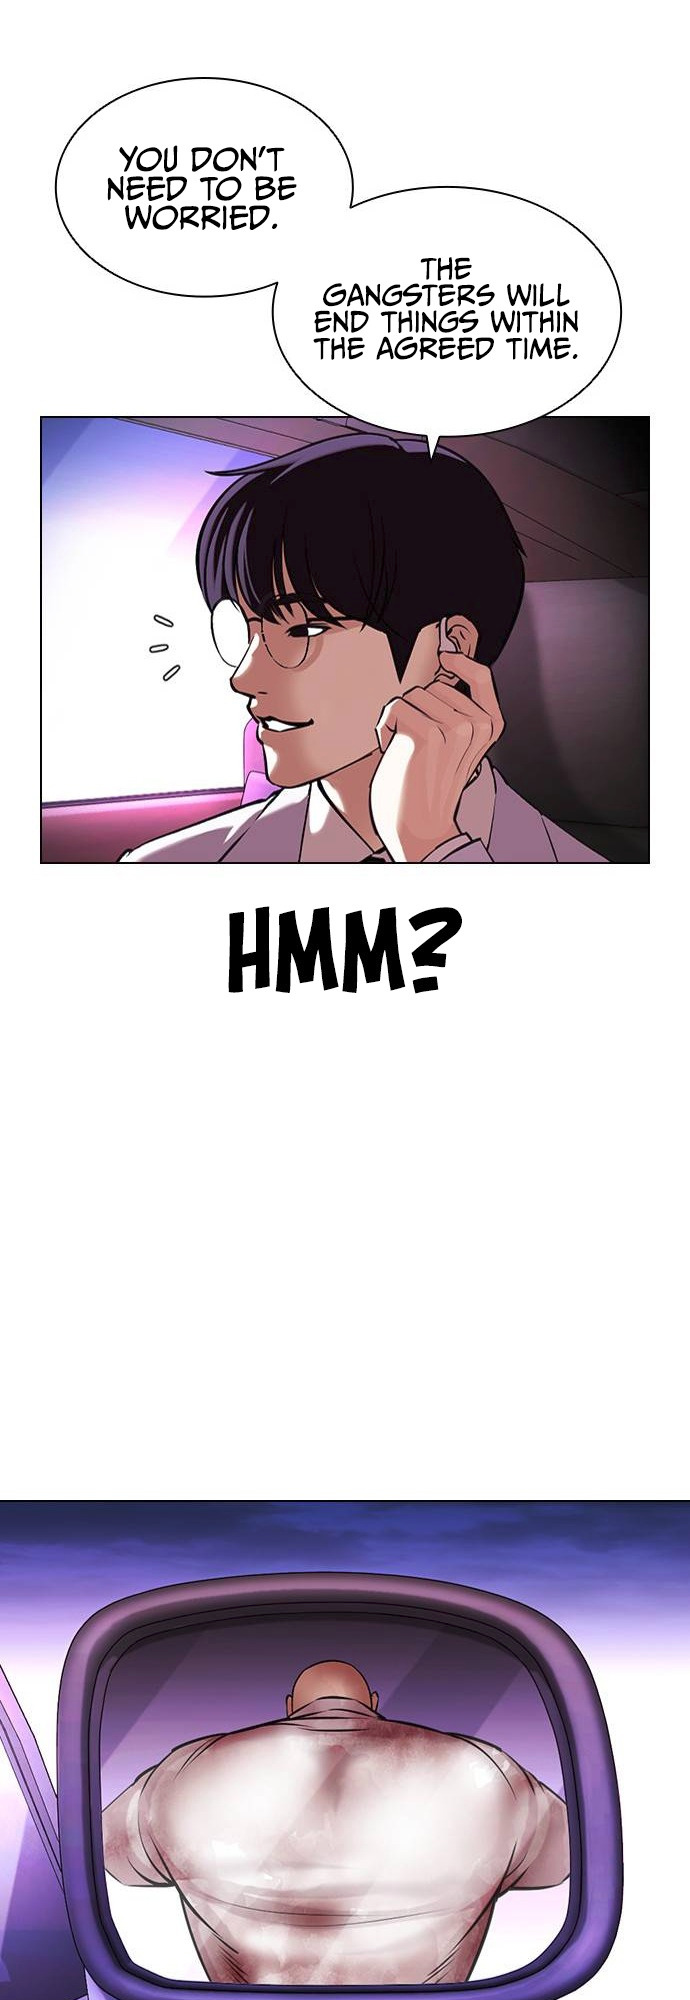 Lookism Chapter 415 image 034